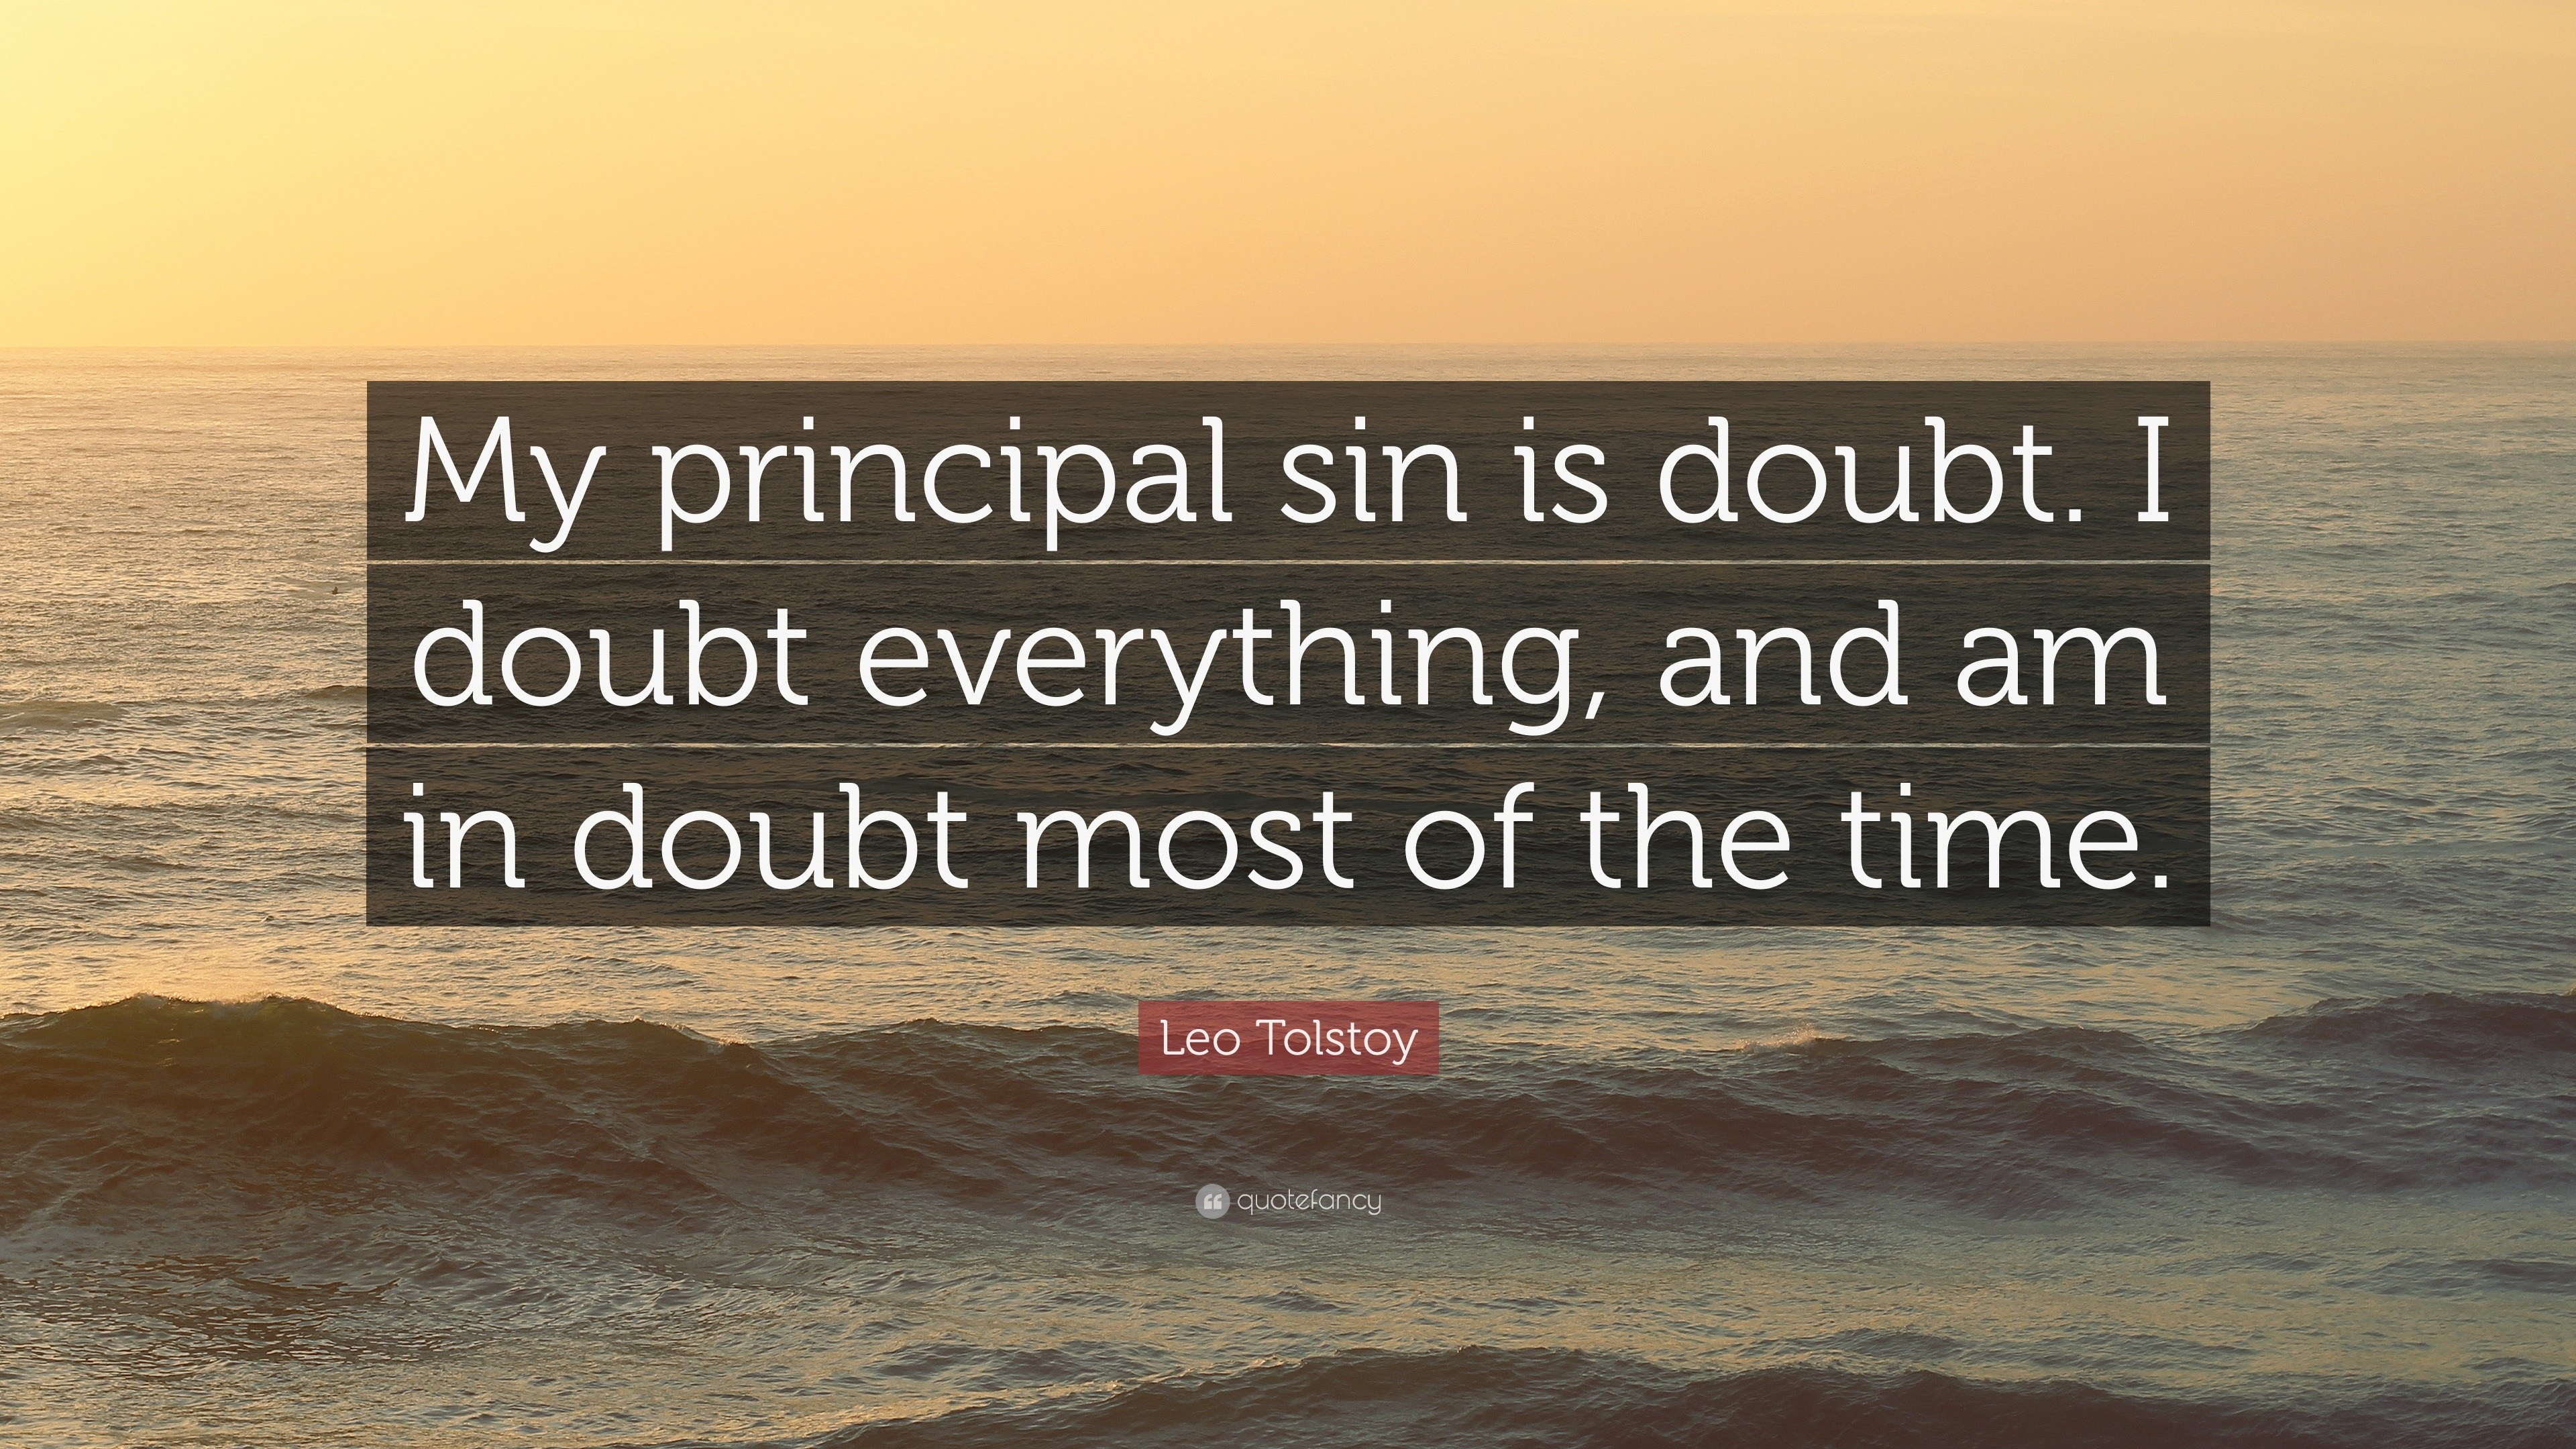 Leo Tolstoy Quote “My principal sin is doubt I doubt everything and